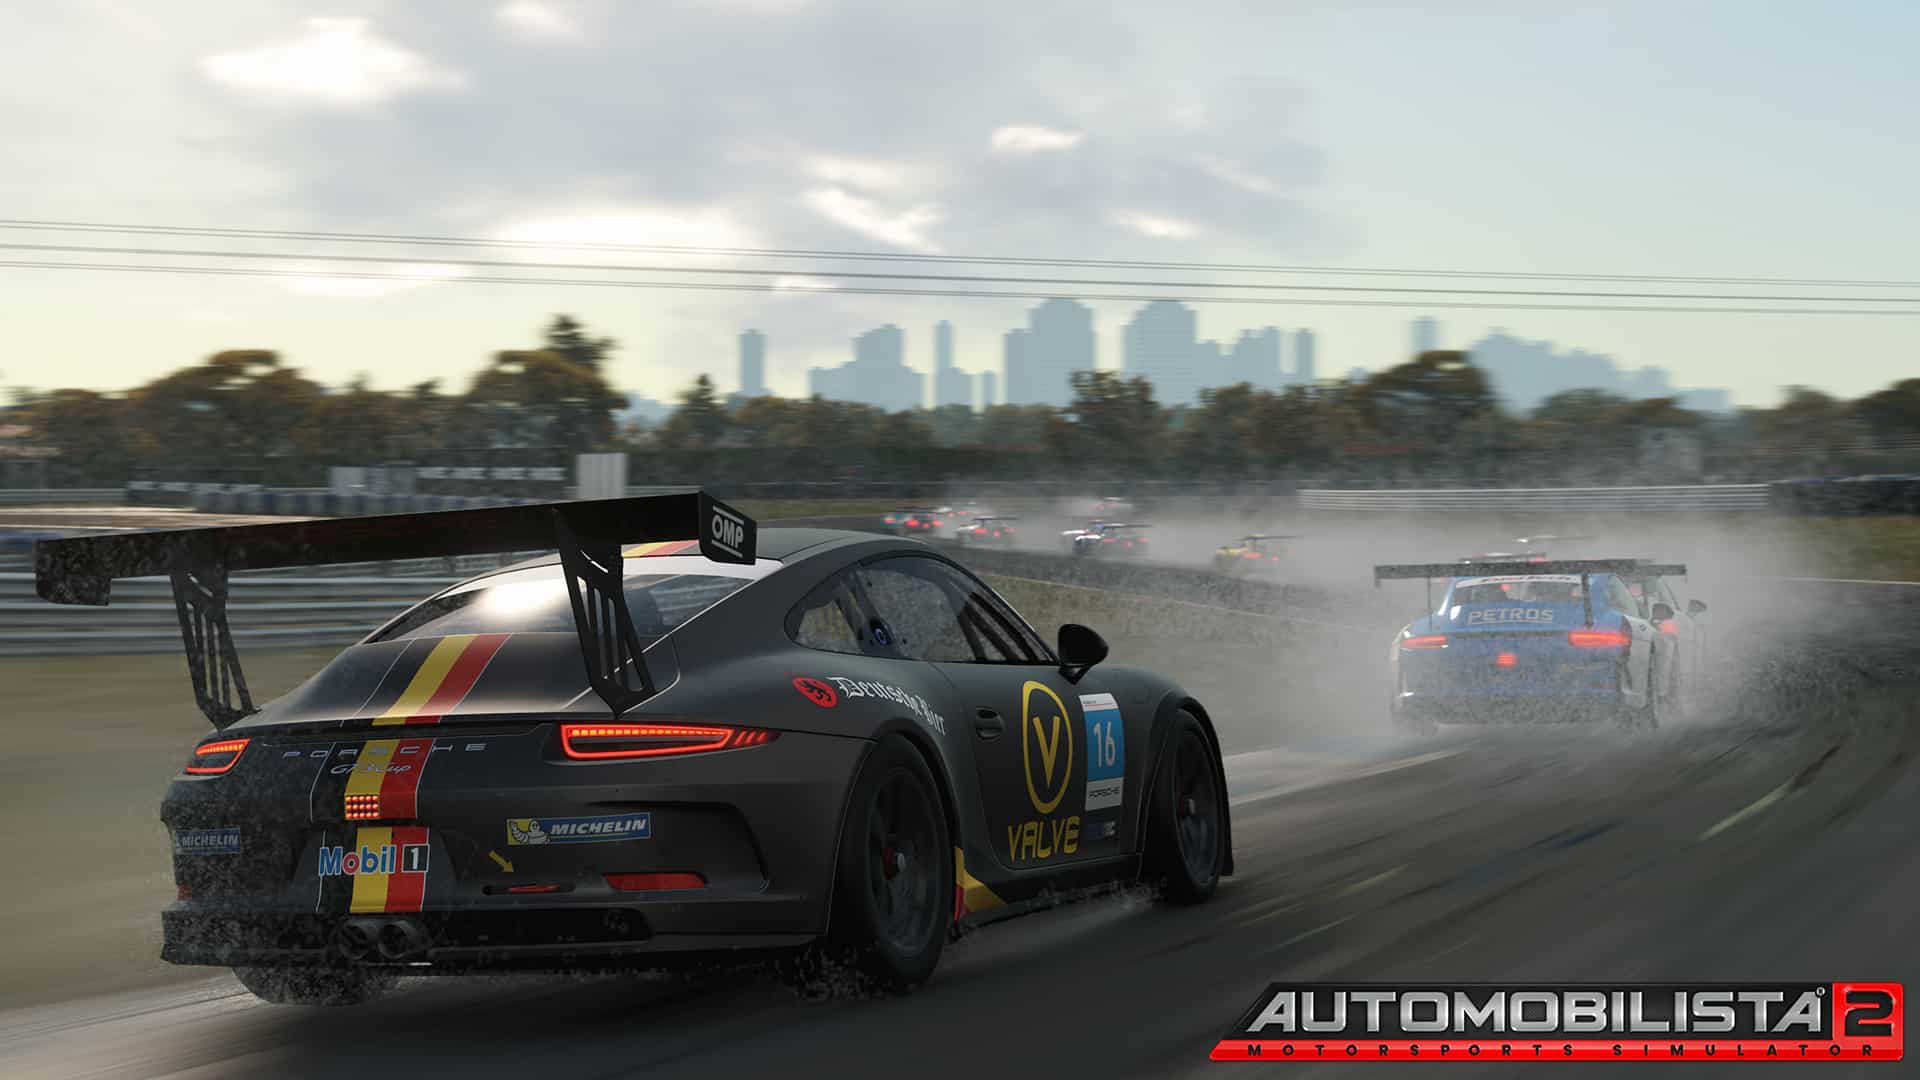 Argentinian Track Pack, Oval racing coming soon to Automobilista 2